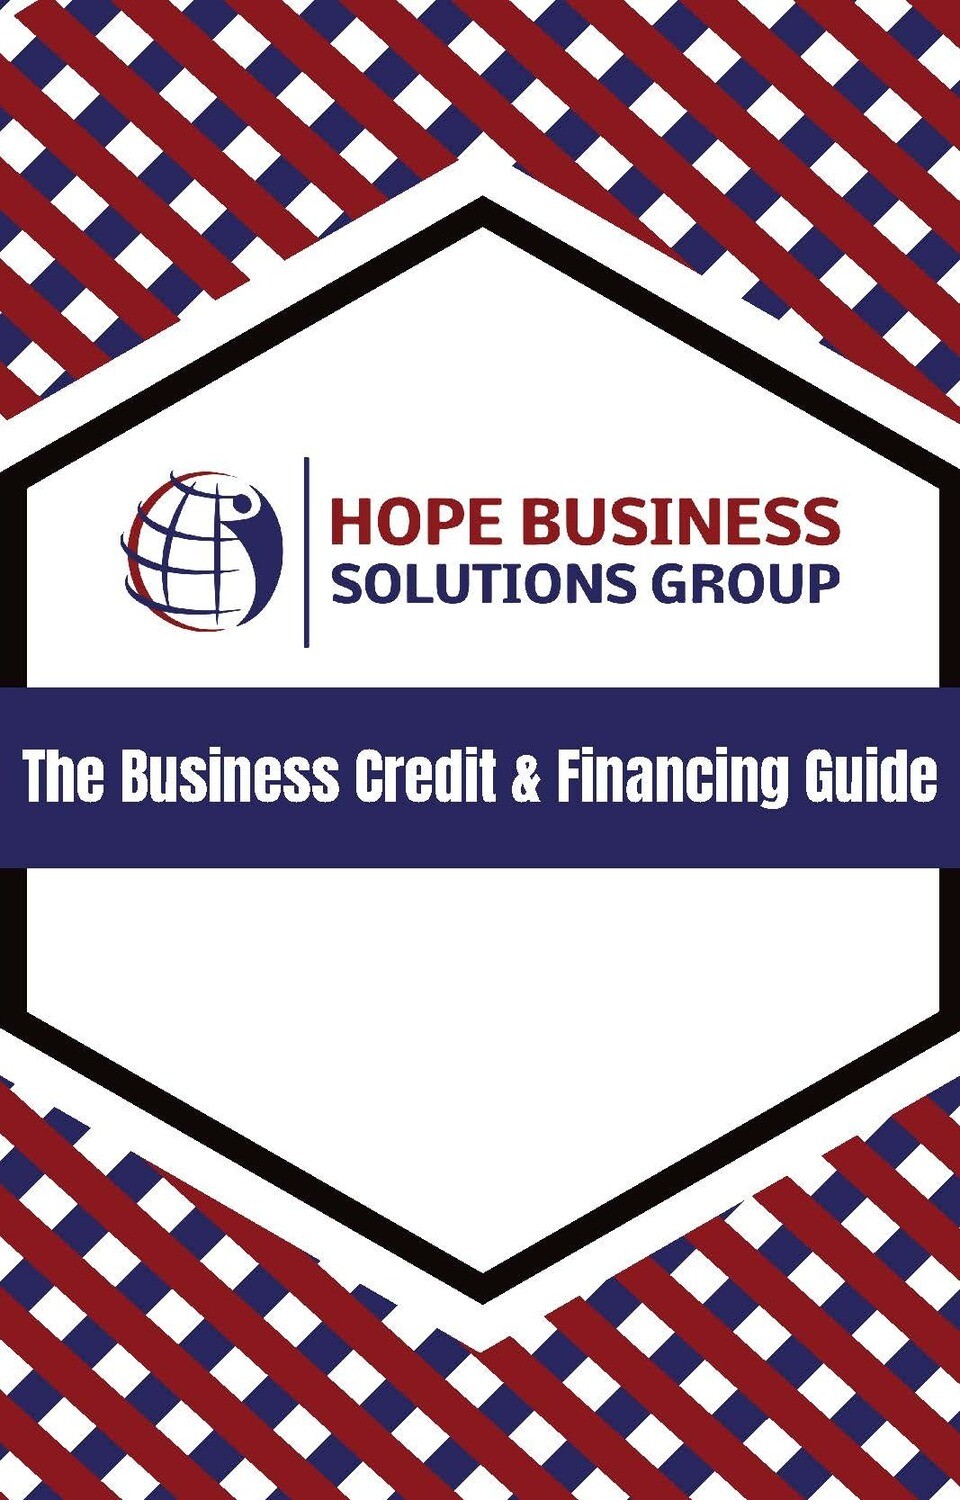 Hope Business Solutions Group: The Business Credit & Financing Guide